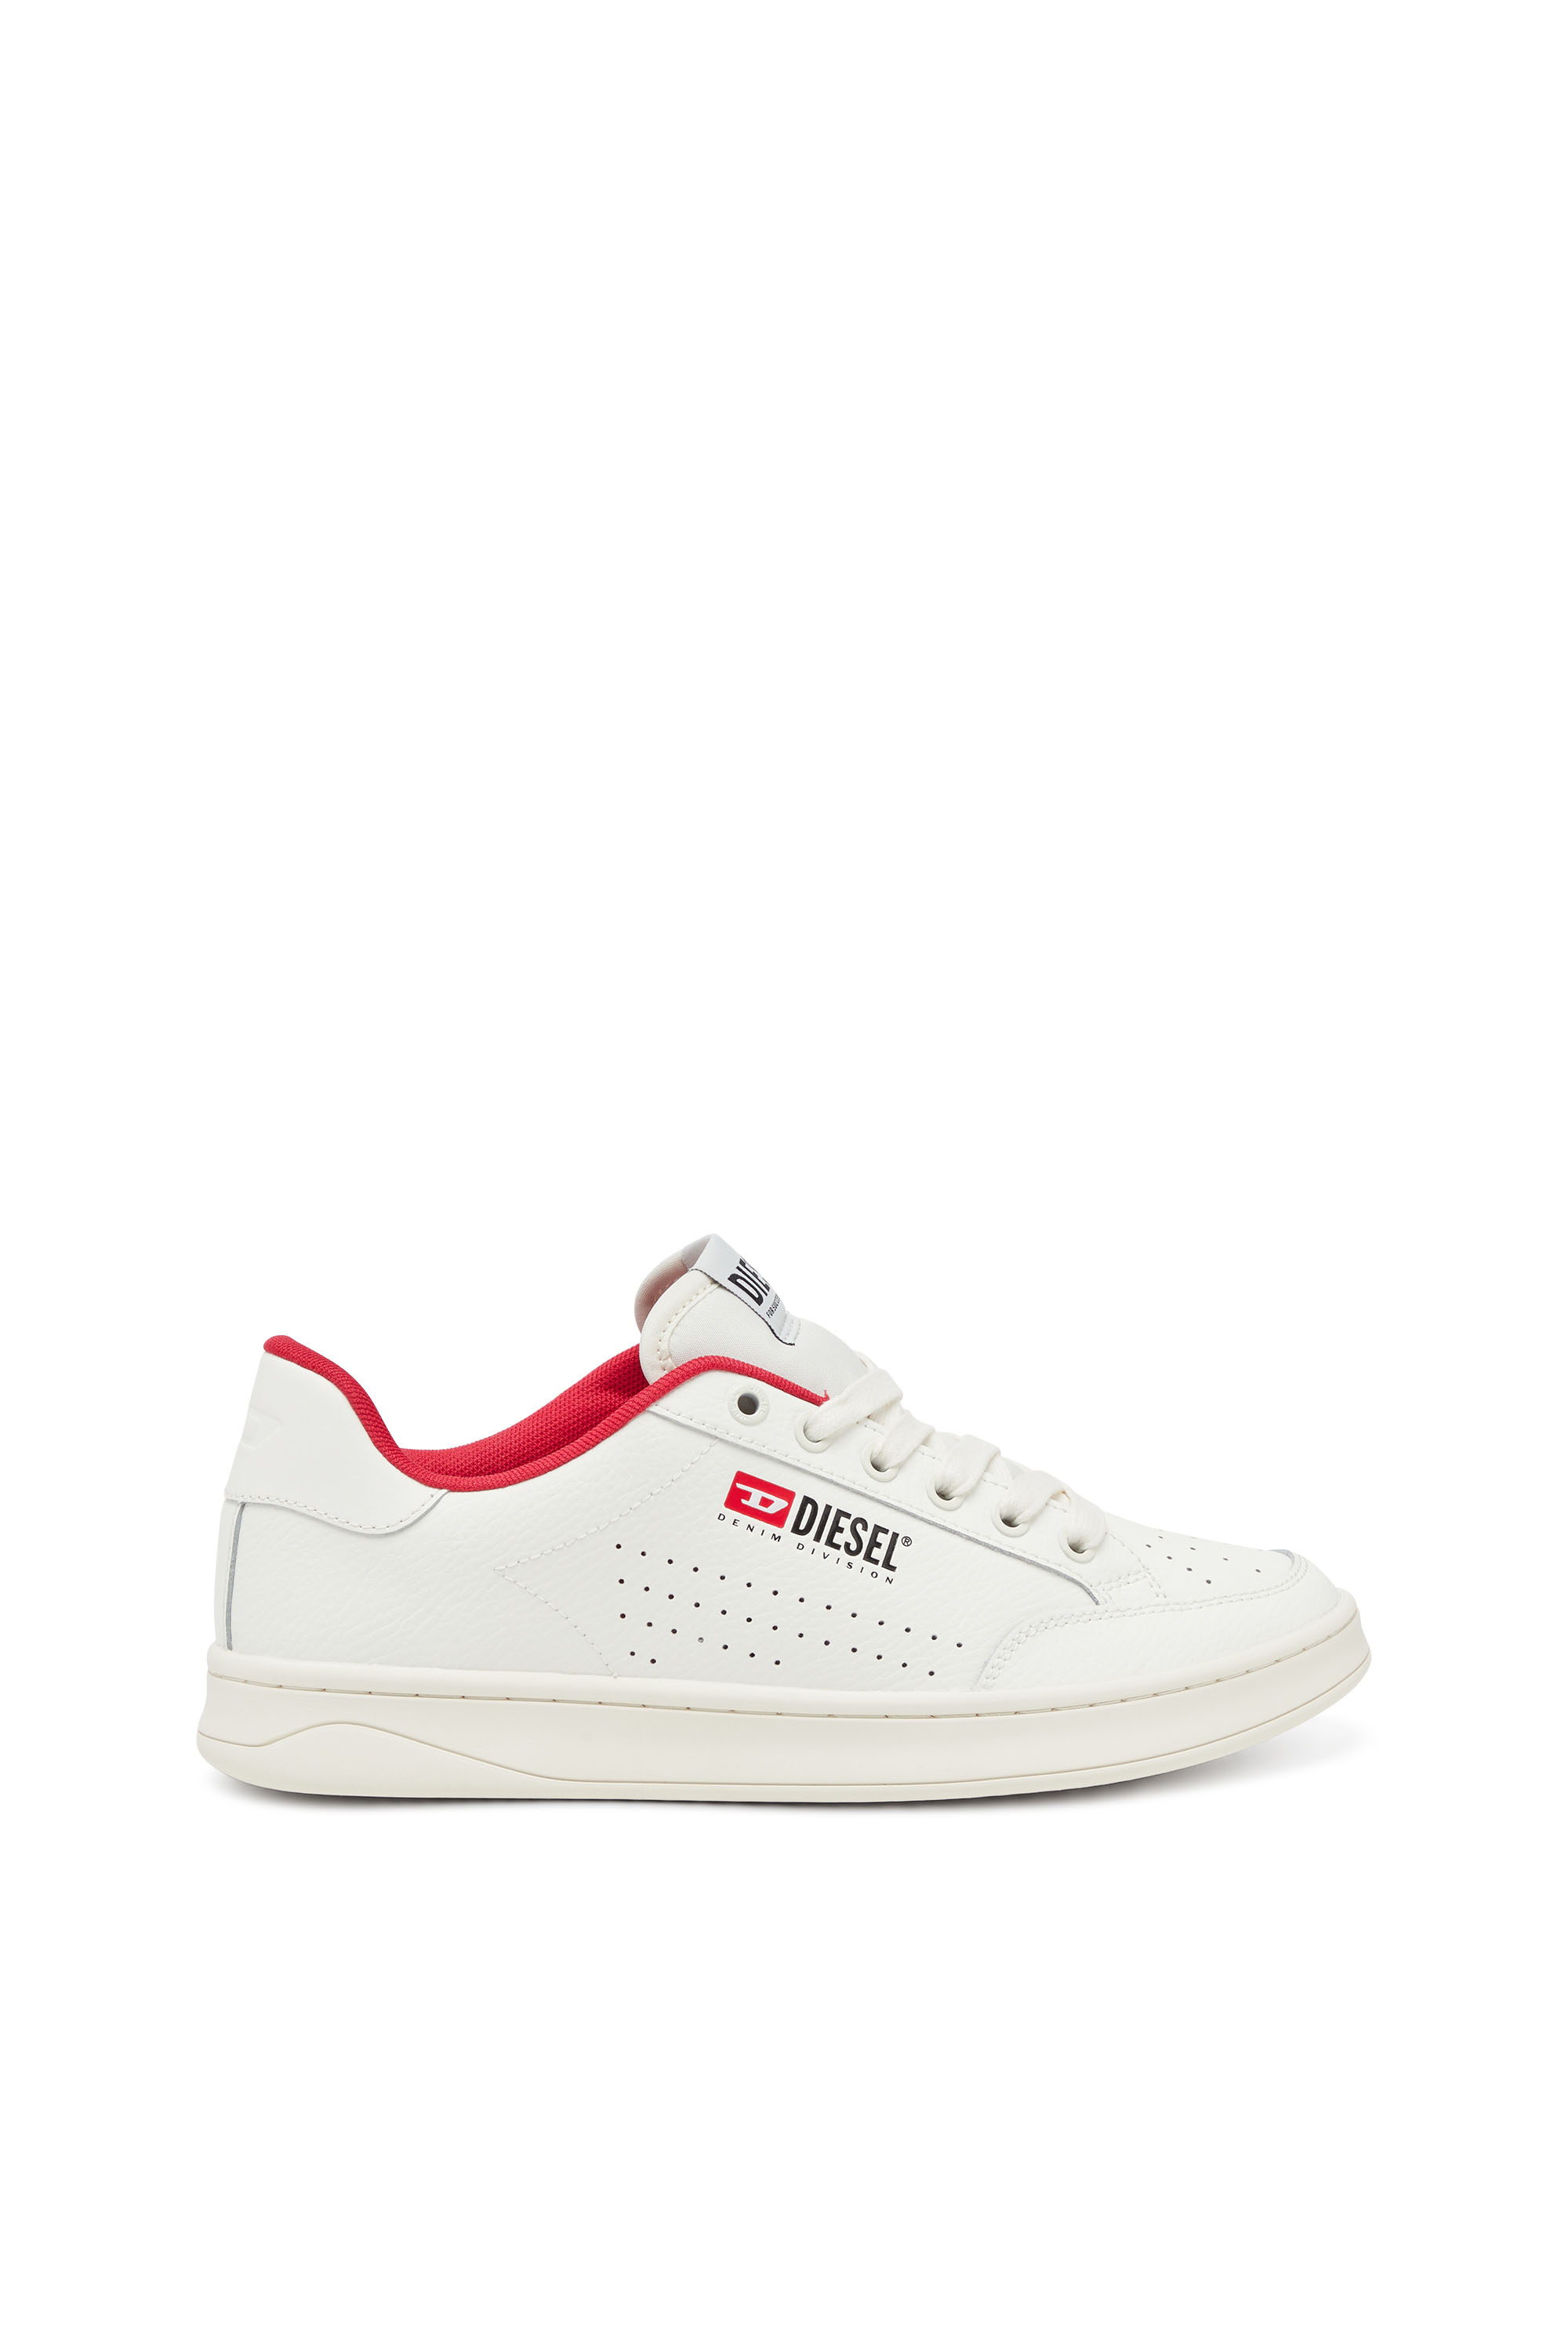 Diesel - S-ATHENE VTG, Man S-Athene-Retro sneakers in perforated leather in Multicolor - Image 1